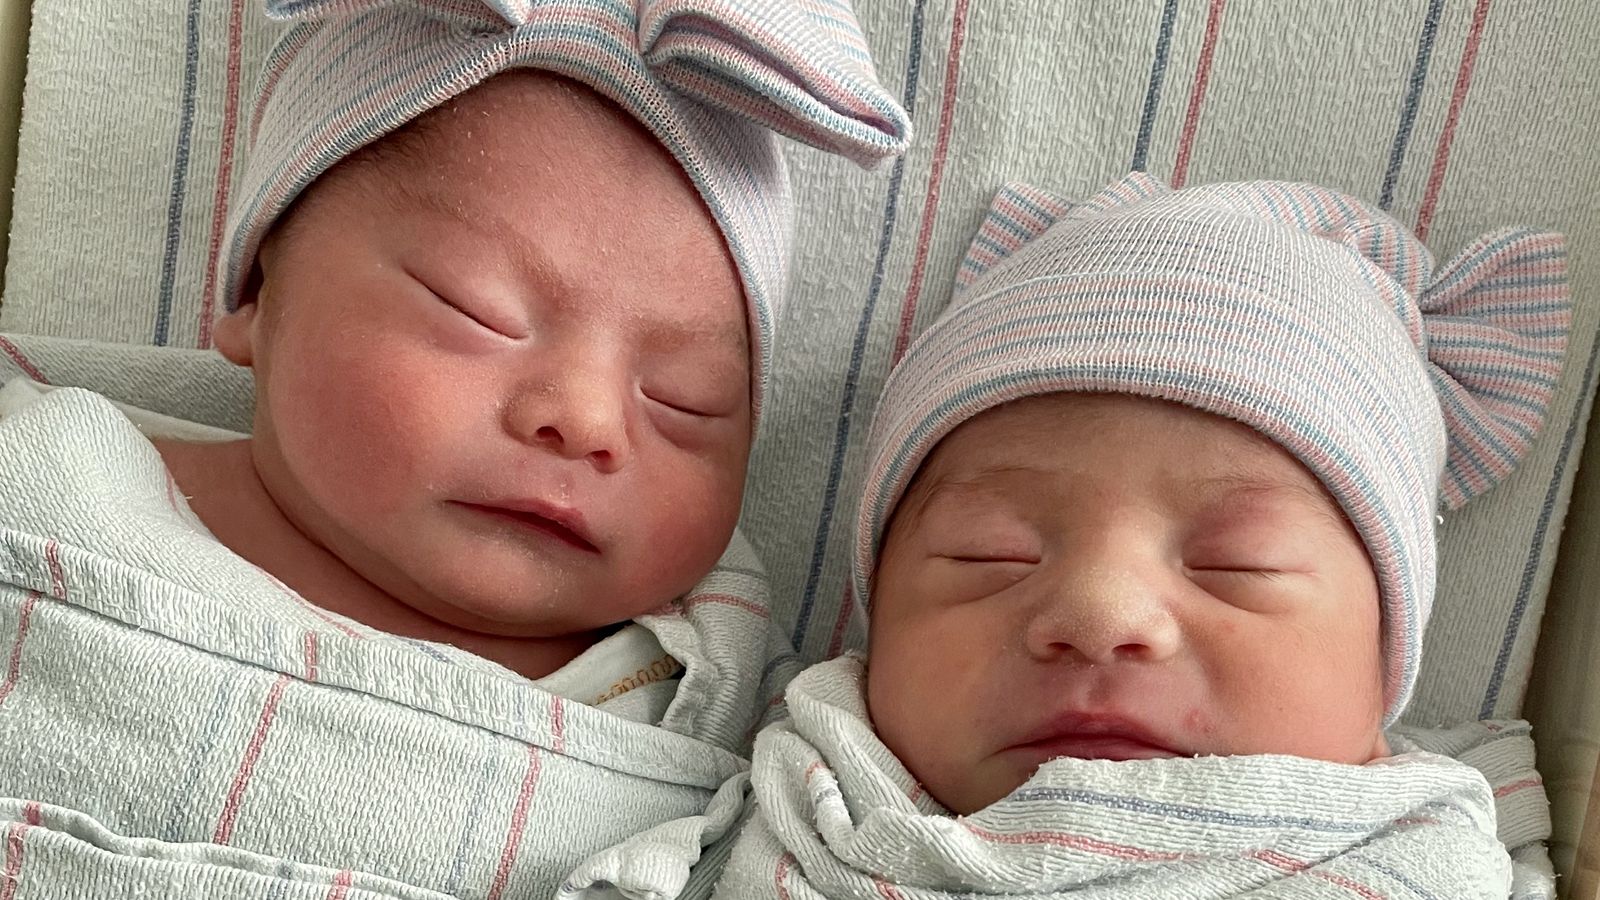 California twins born 15 minutes apart end up having separate birthdays in different years after being born around New Year’s Day